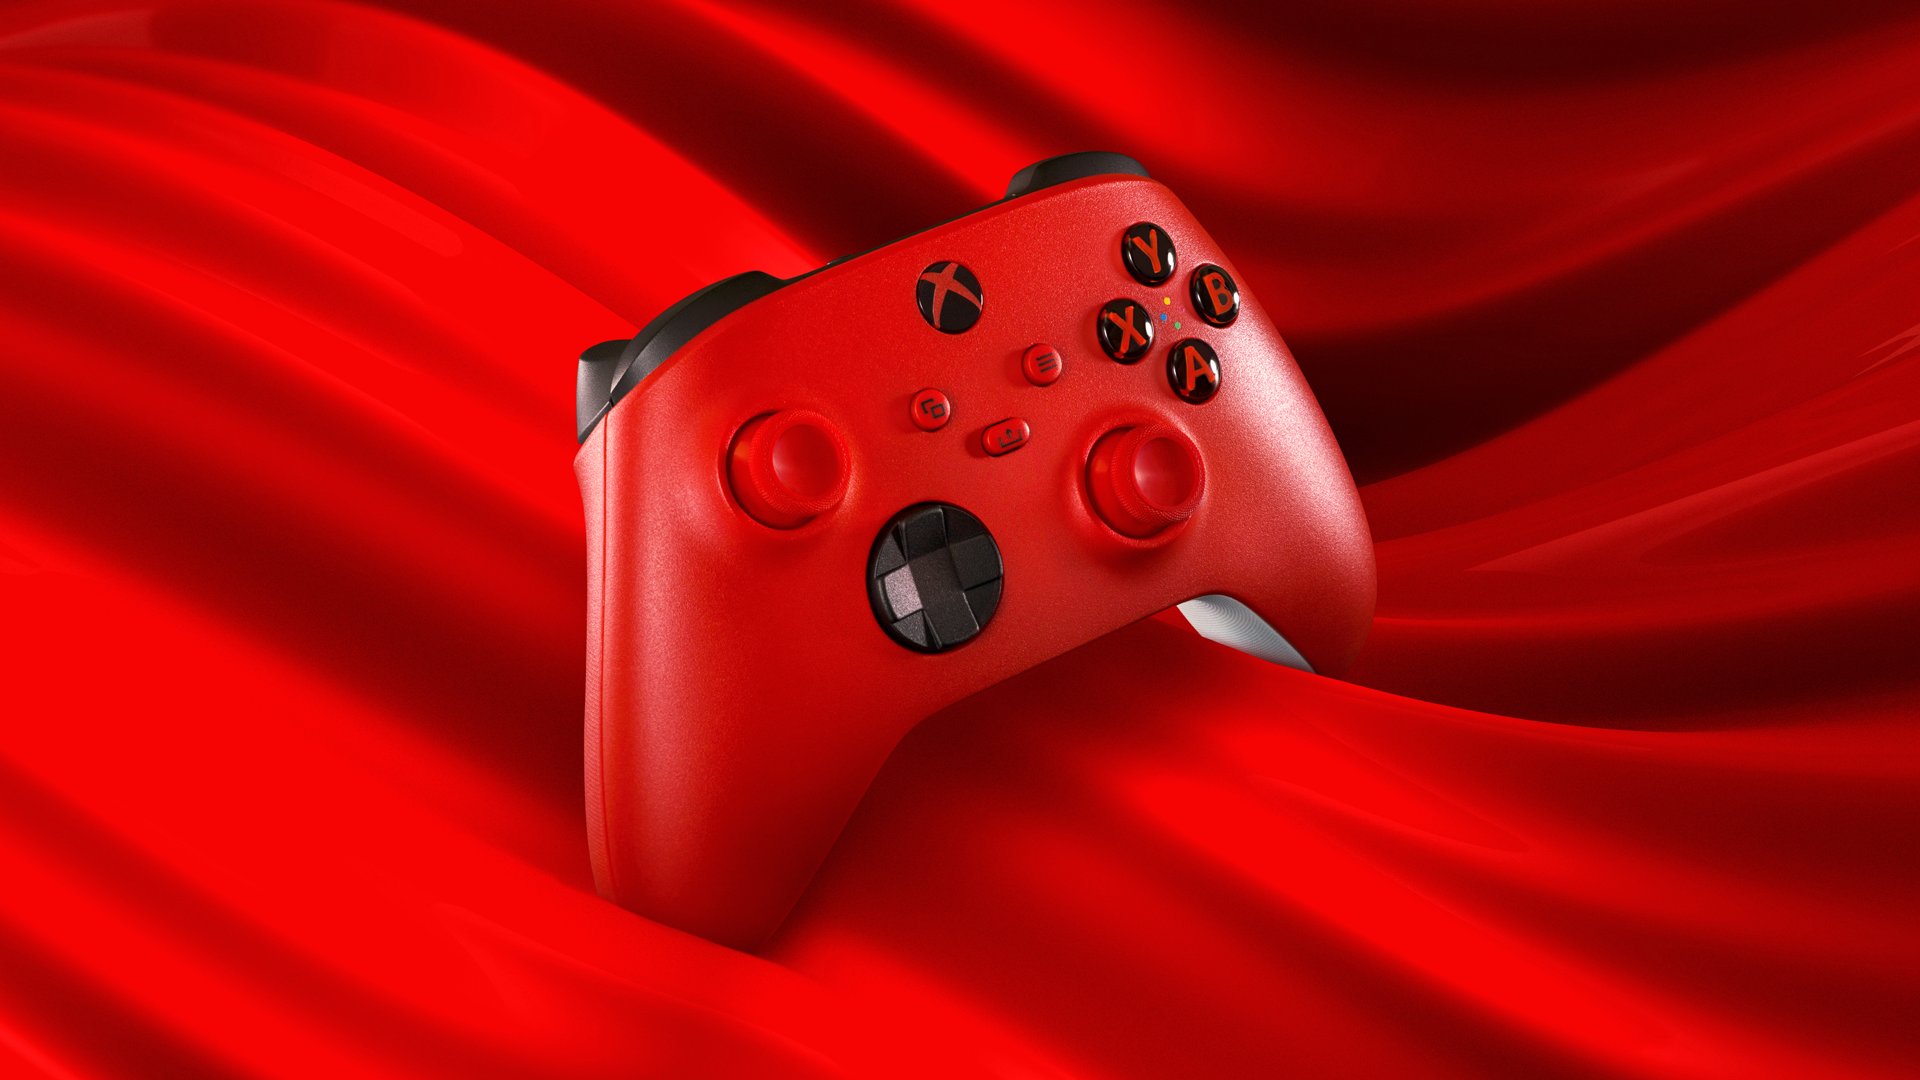 Free download Xbox background red Full HD chất lượng cao